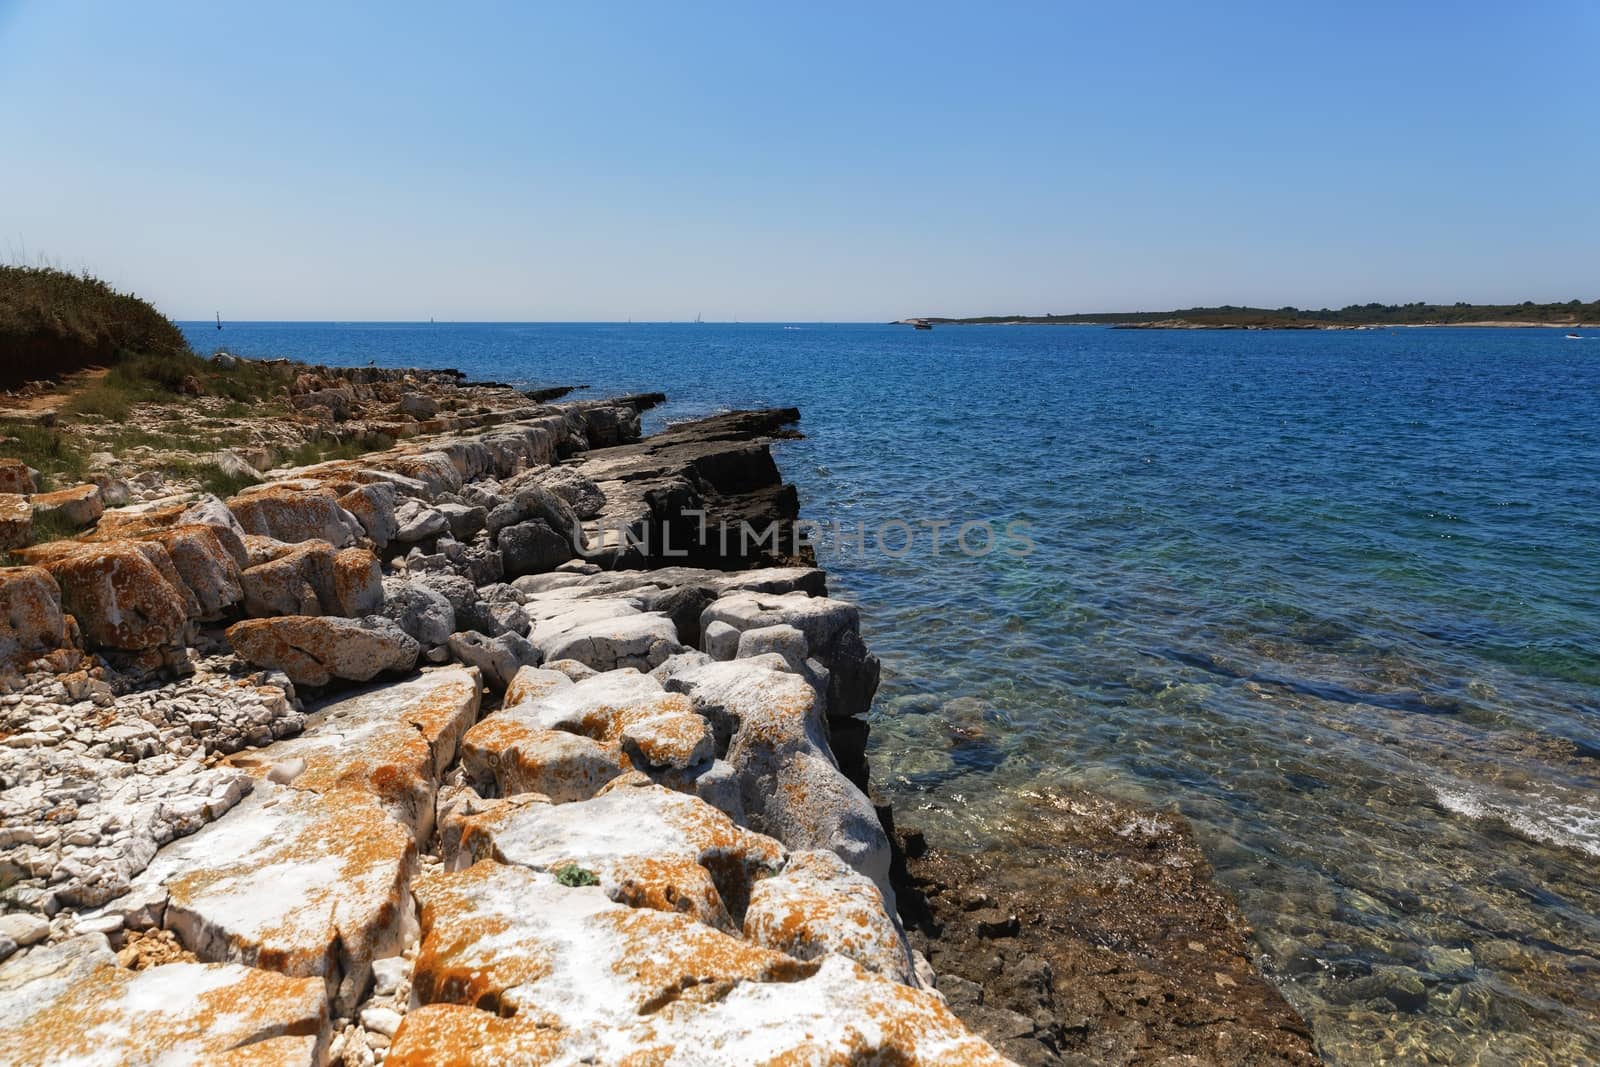 Shores of an island in the mediterraneans scenic photo